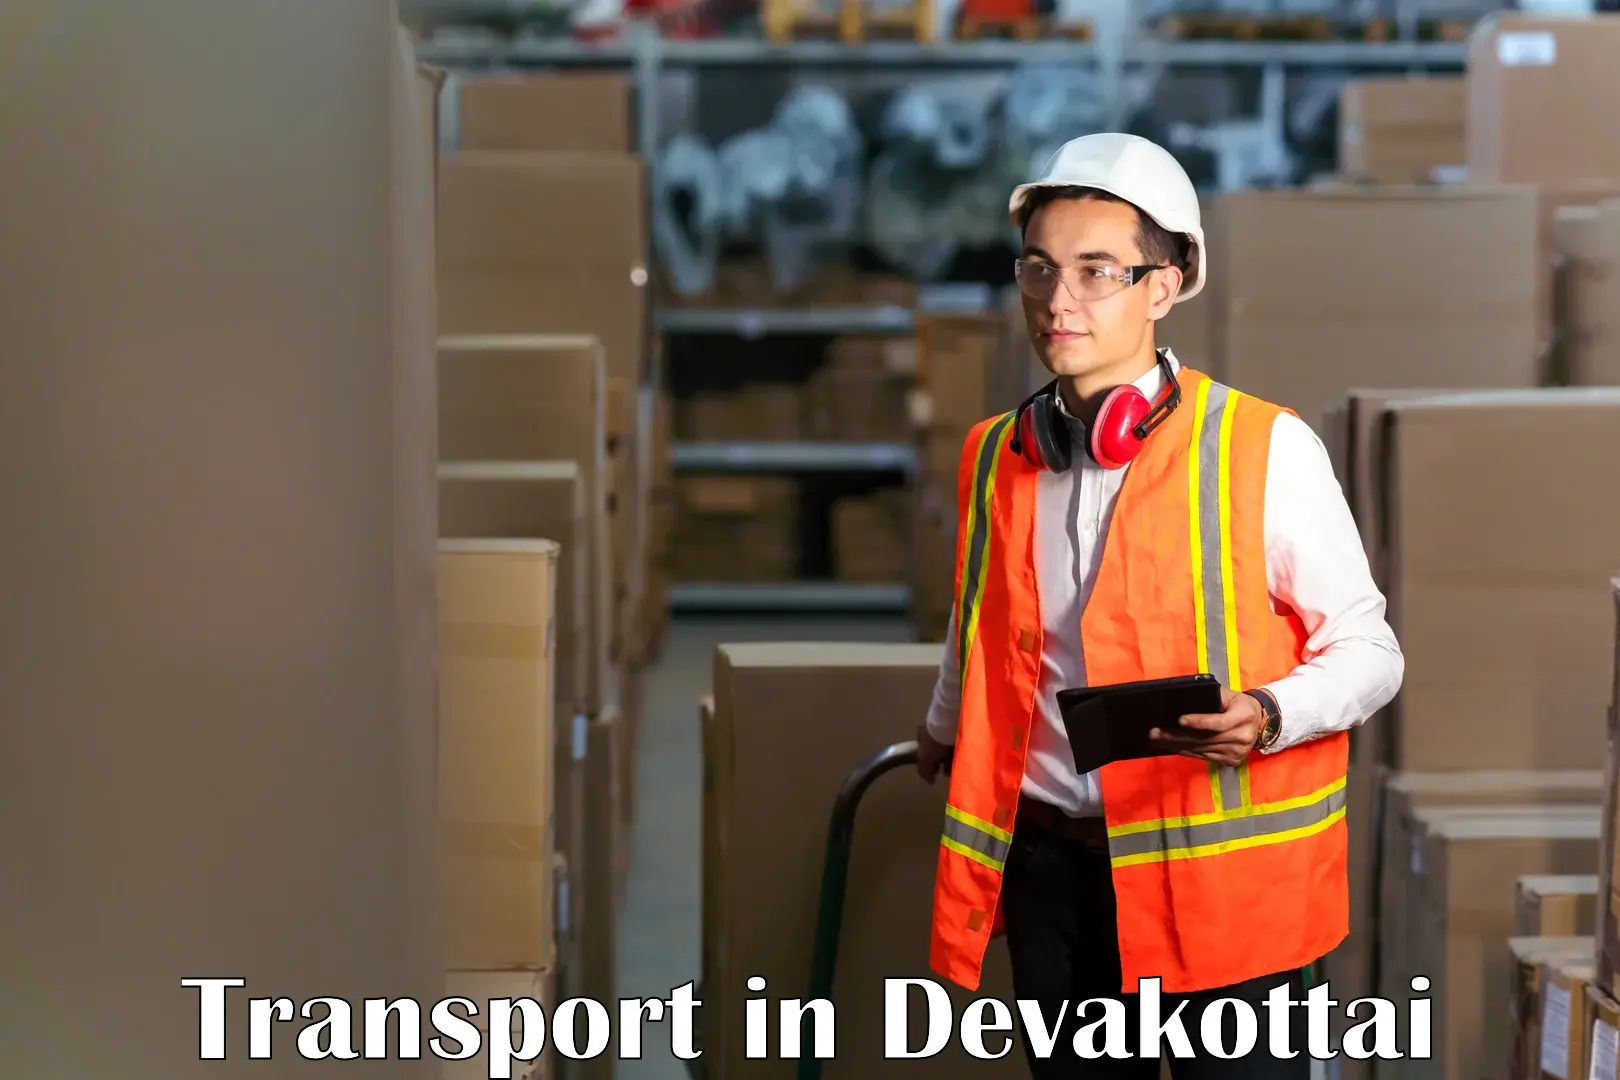 Transport bike from one state to another in Devakottai